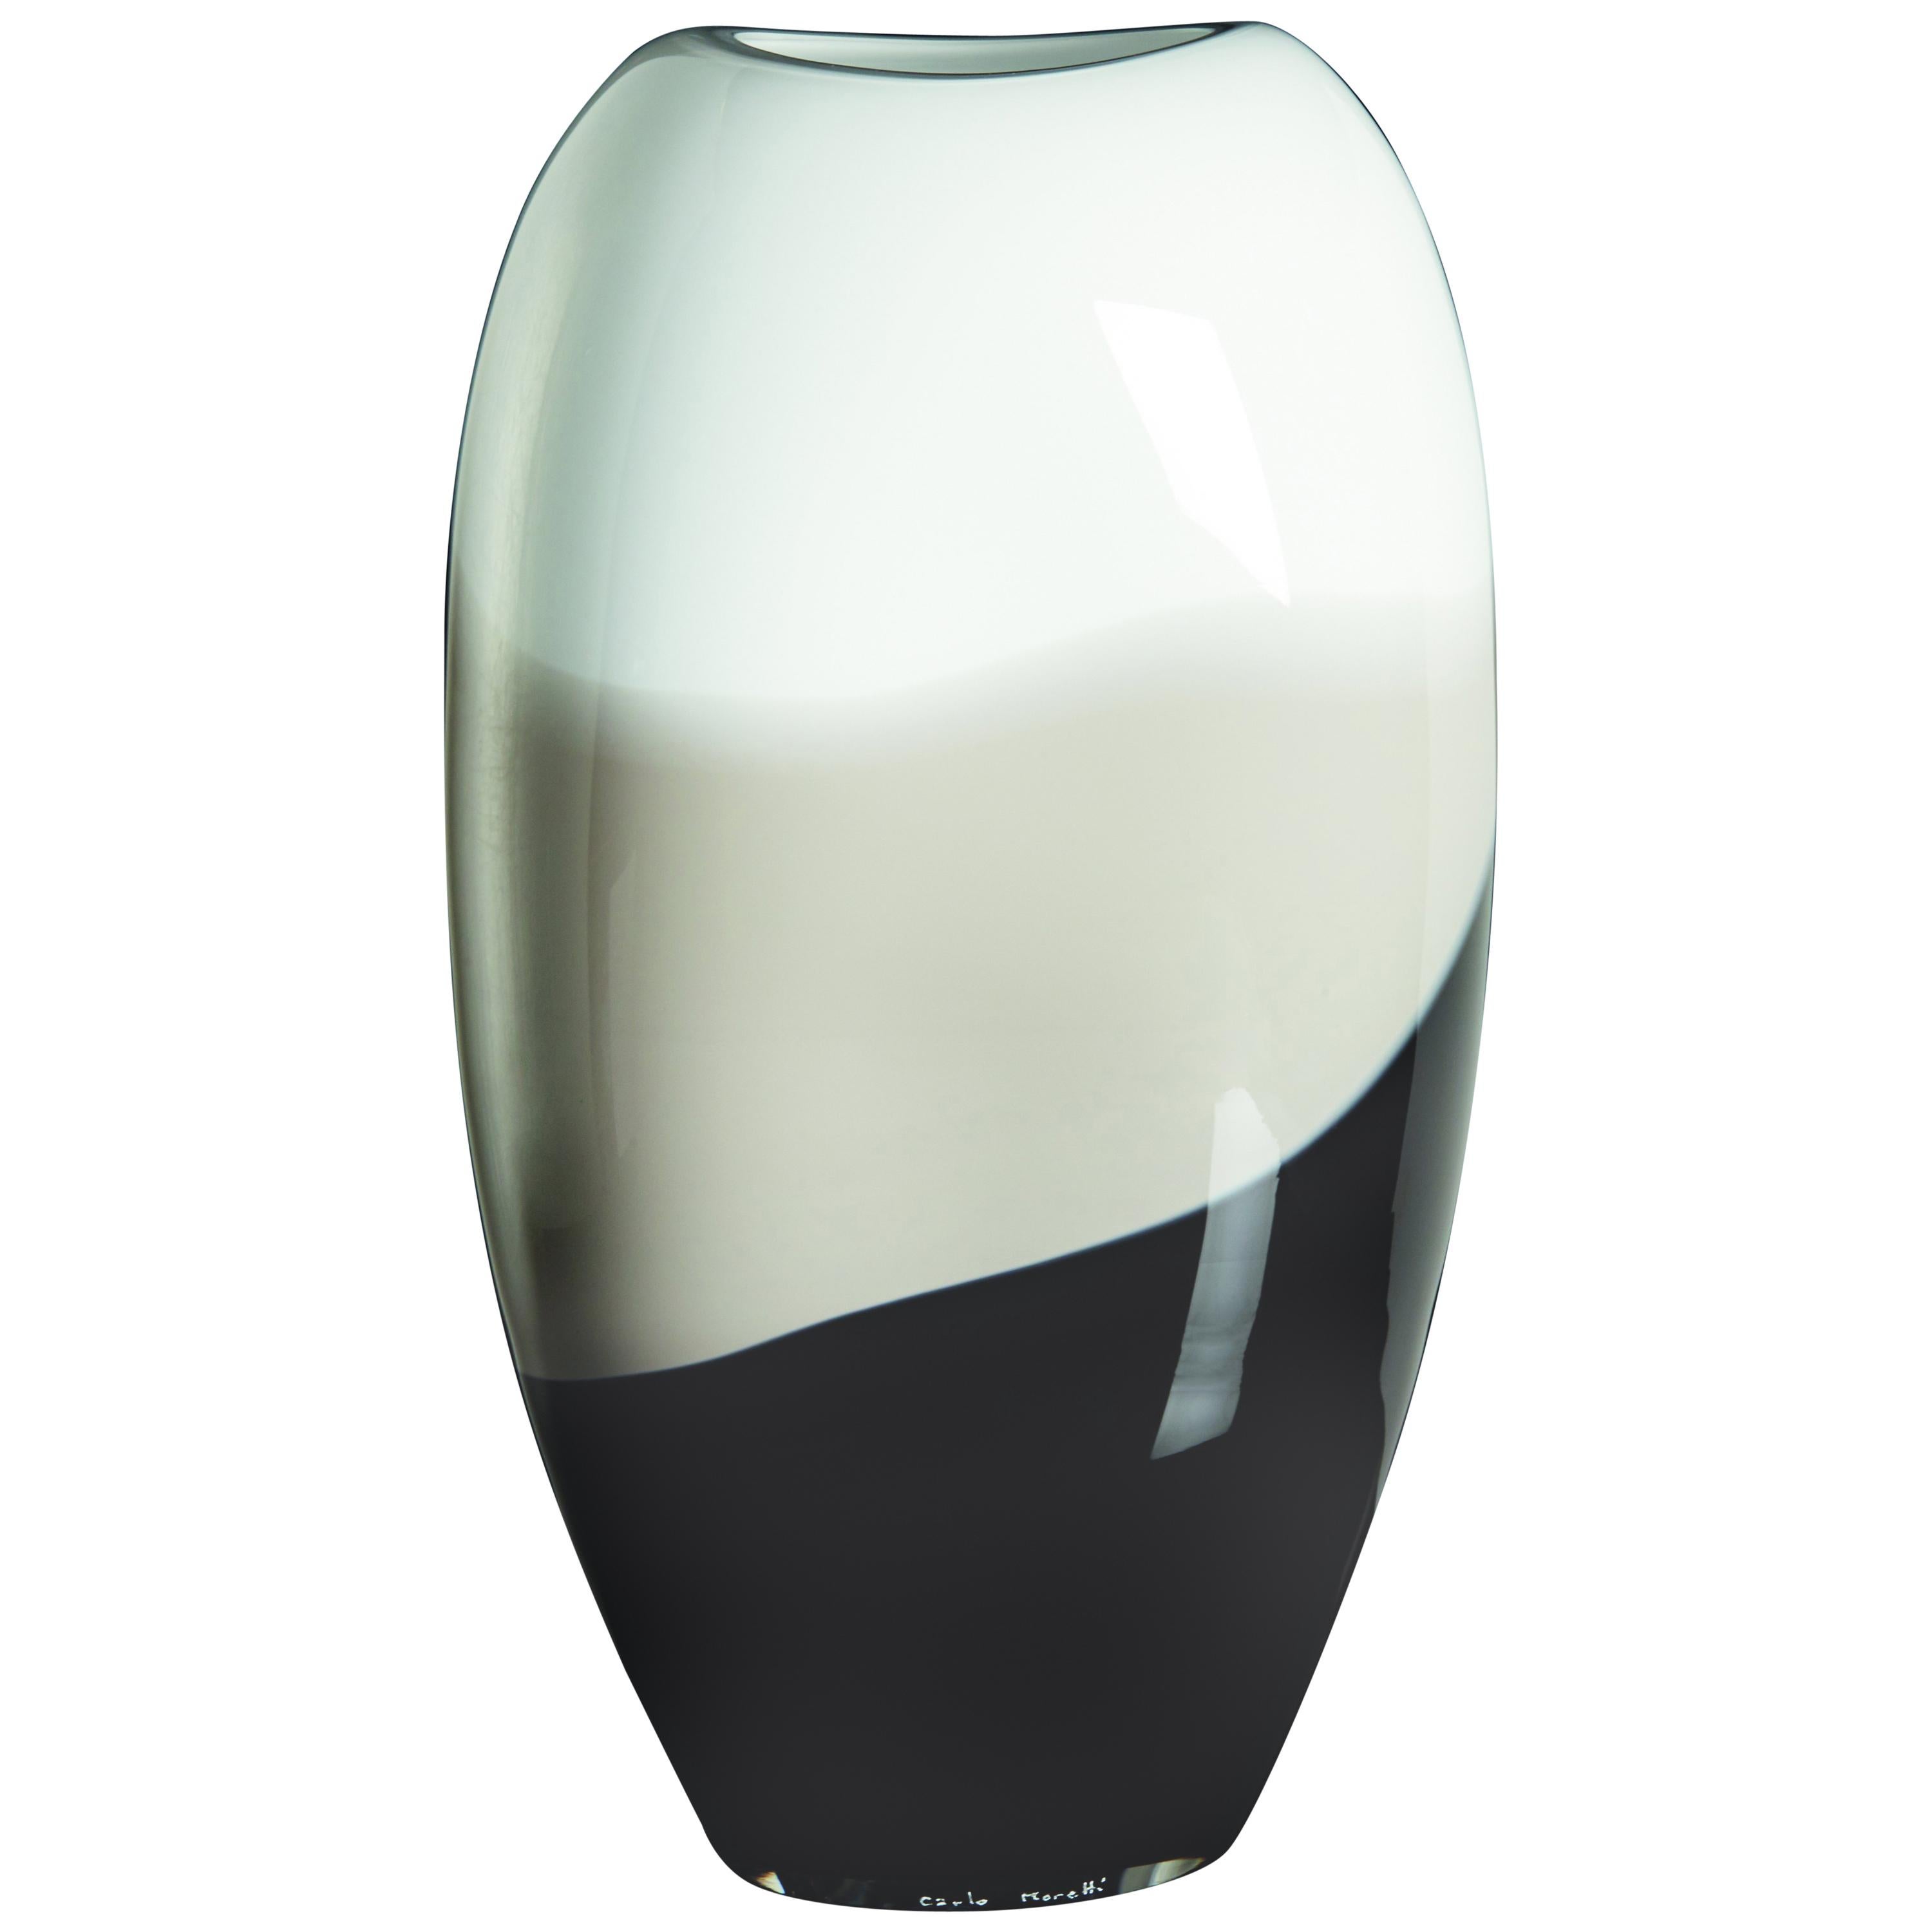 Ellisse Vase in White, Grey and Black by Carlo Moretti